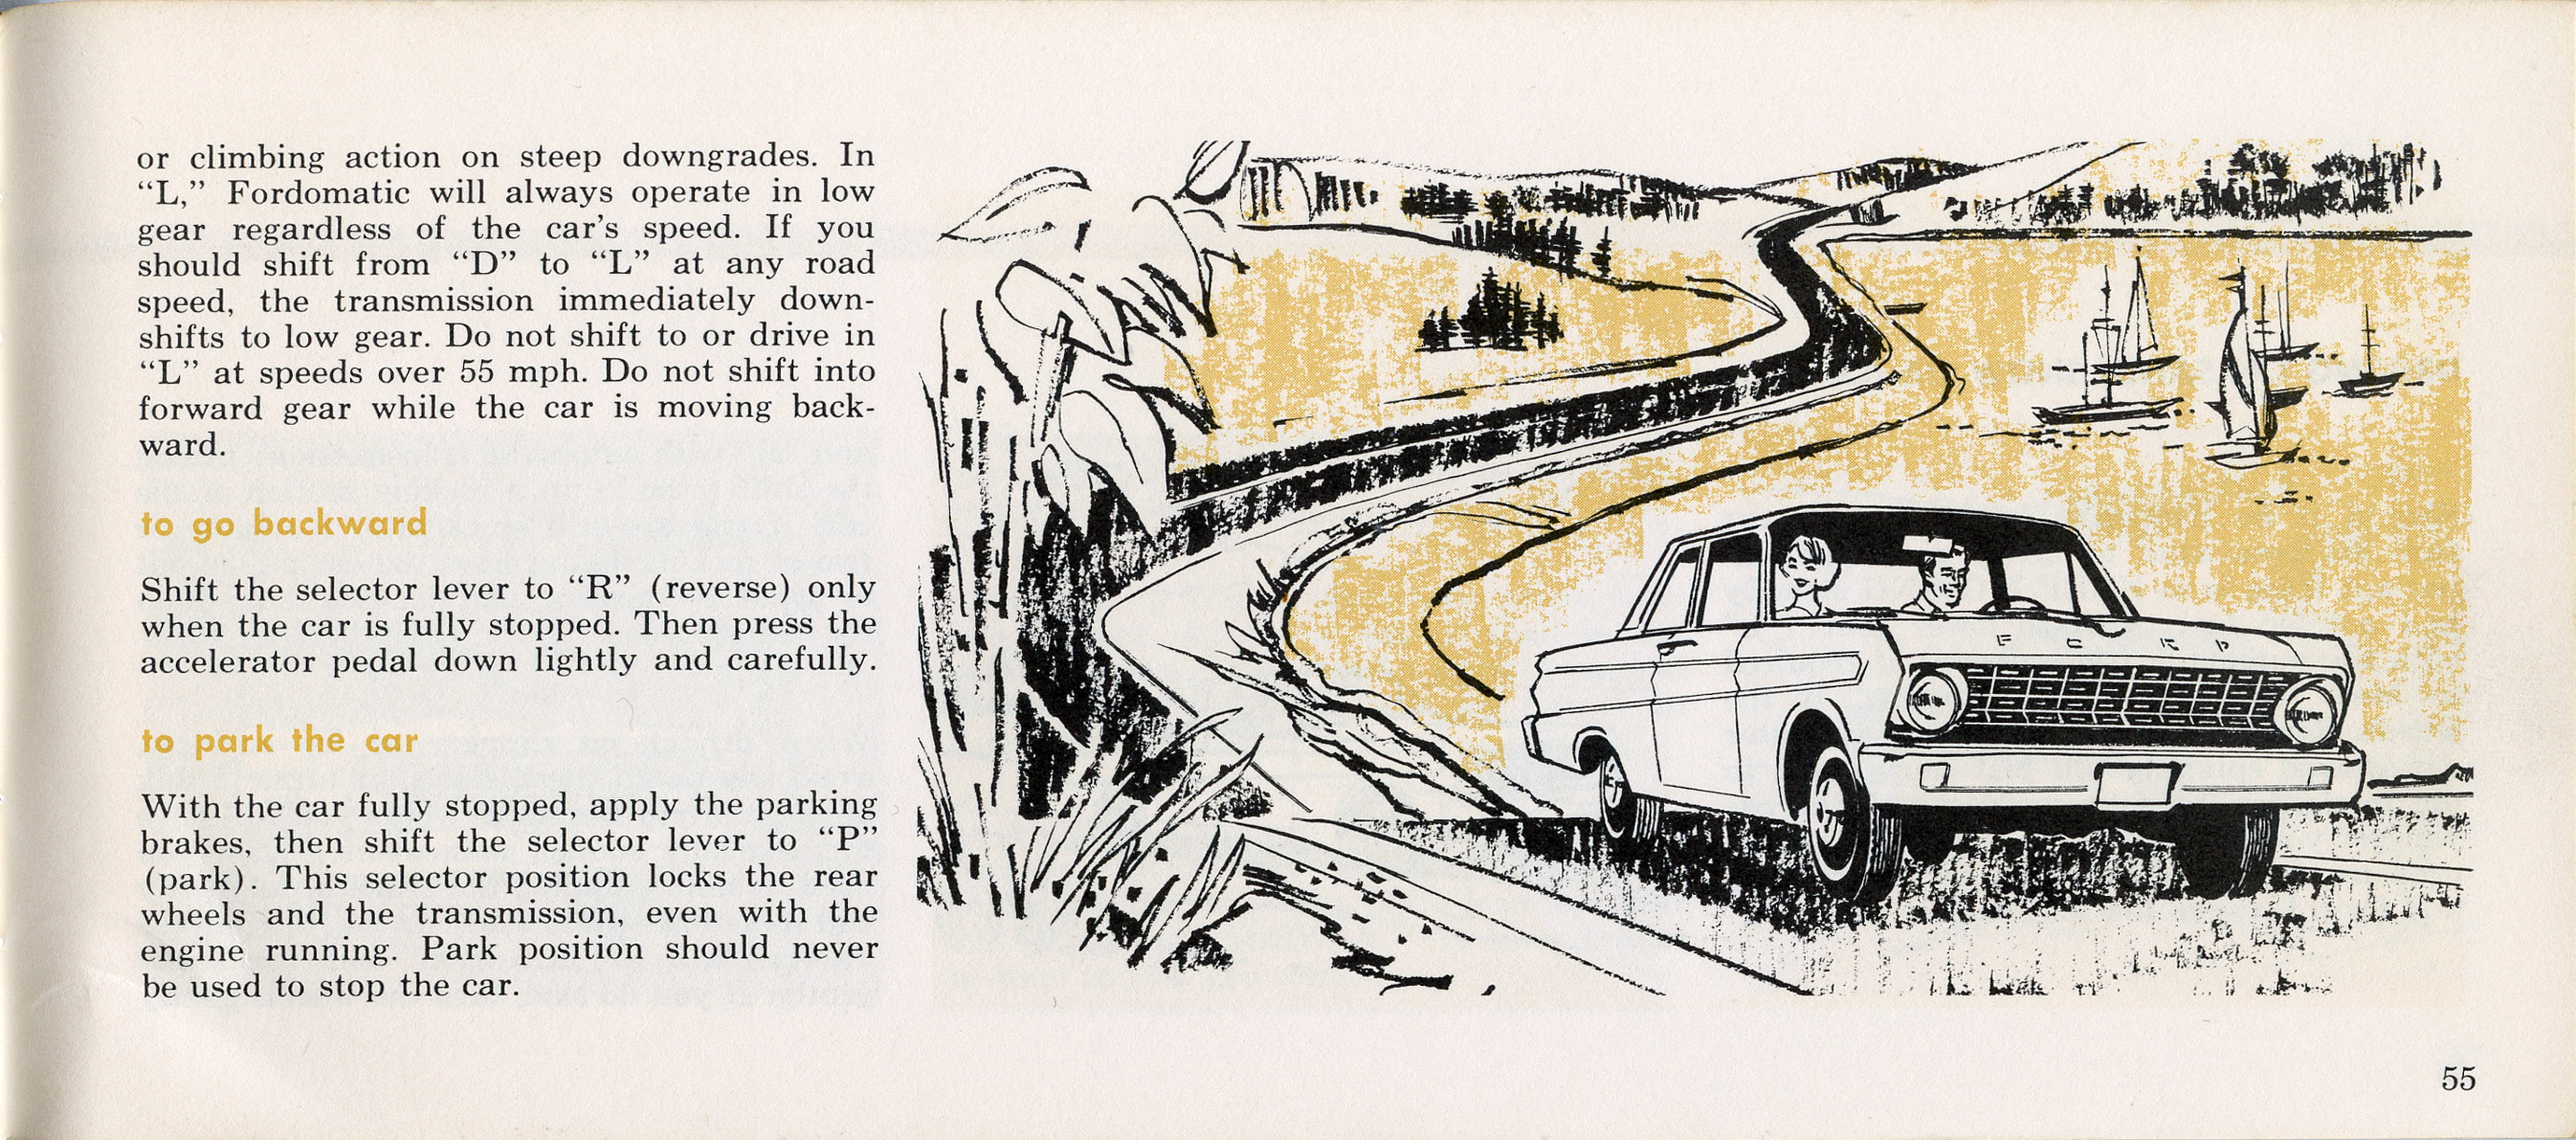 1964 Ford Falcon Owners Manual-55